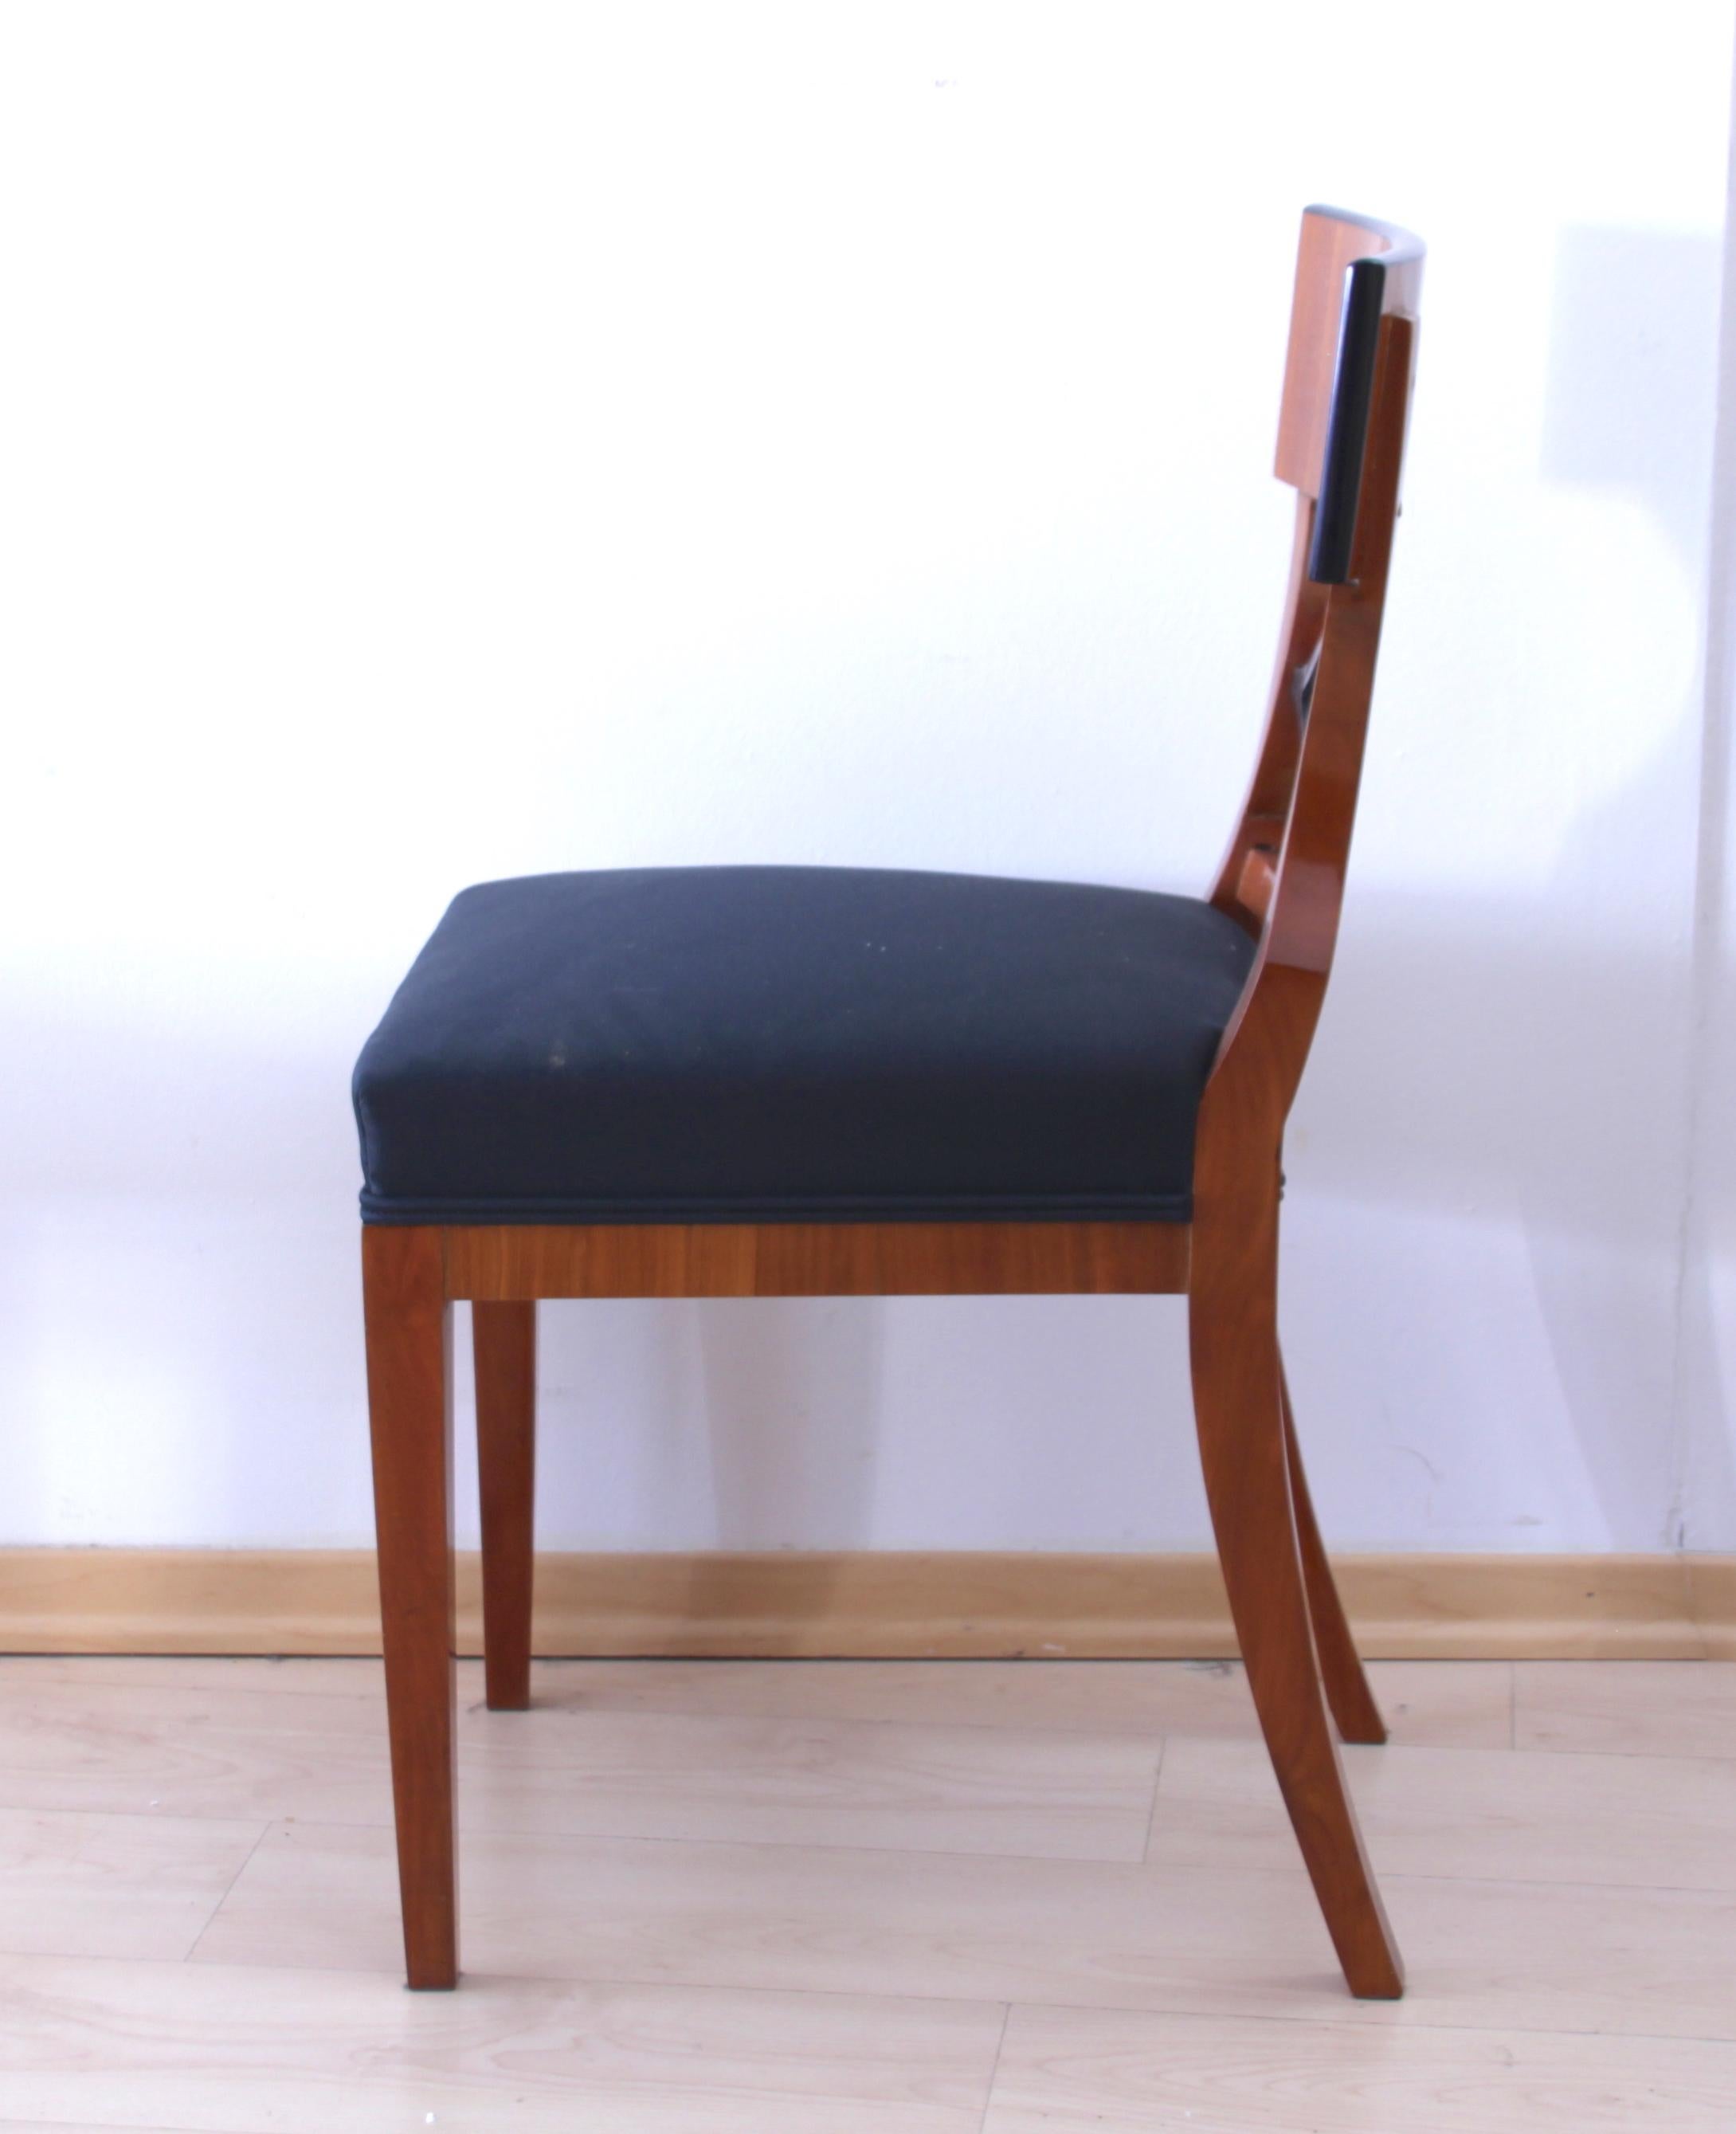 Two lovely Biedermeier Chairs from the second half of the 19th century.

Sold separately, price is for 1 chair.

They are made of cherry solid wood, while the back has a wonderful cherry veneer with birch roots inlay, surrounded by an ebony inlay.